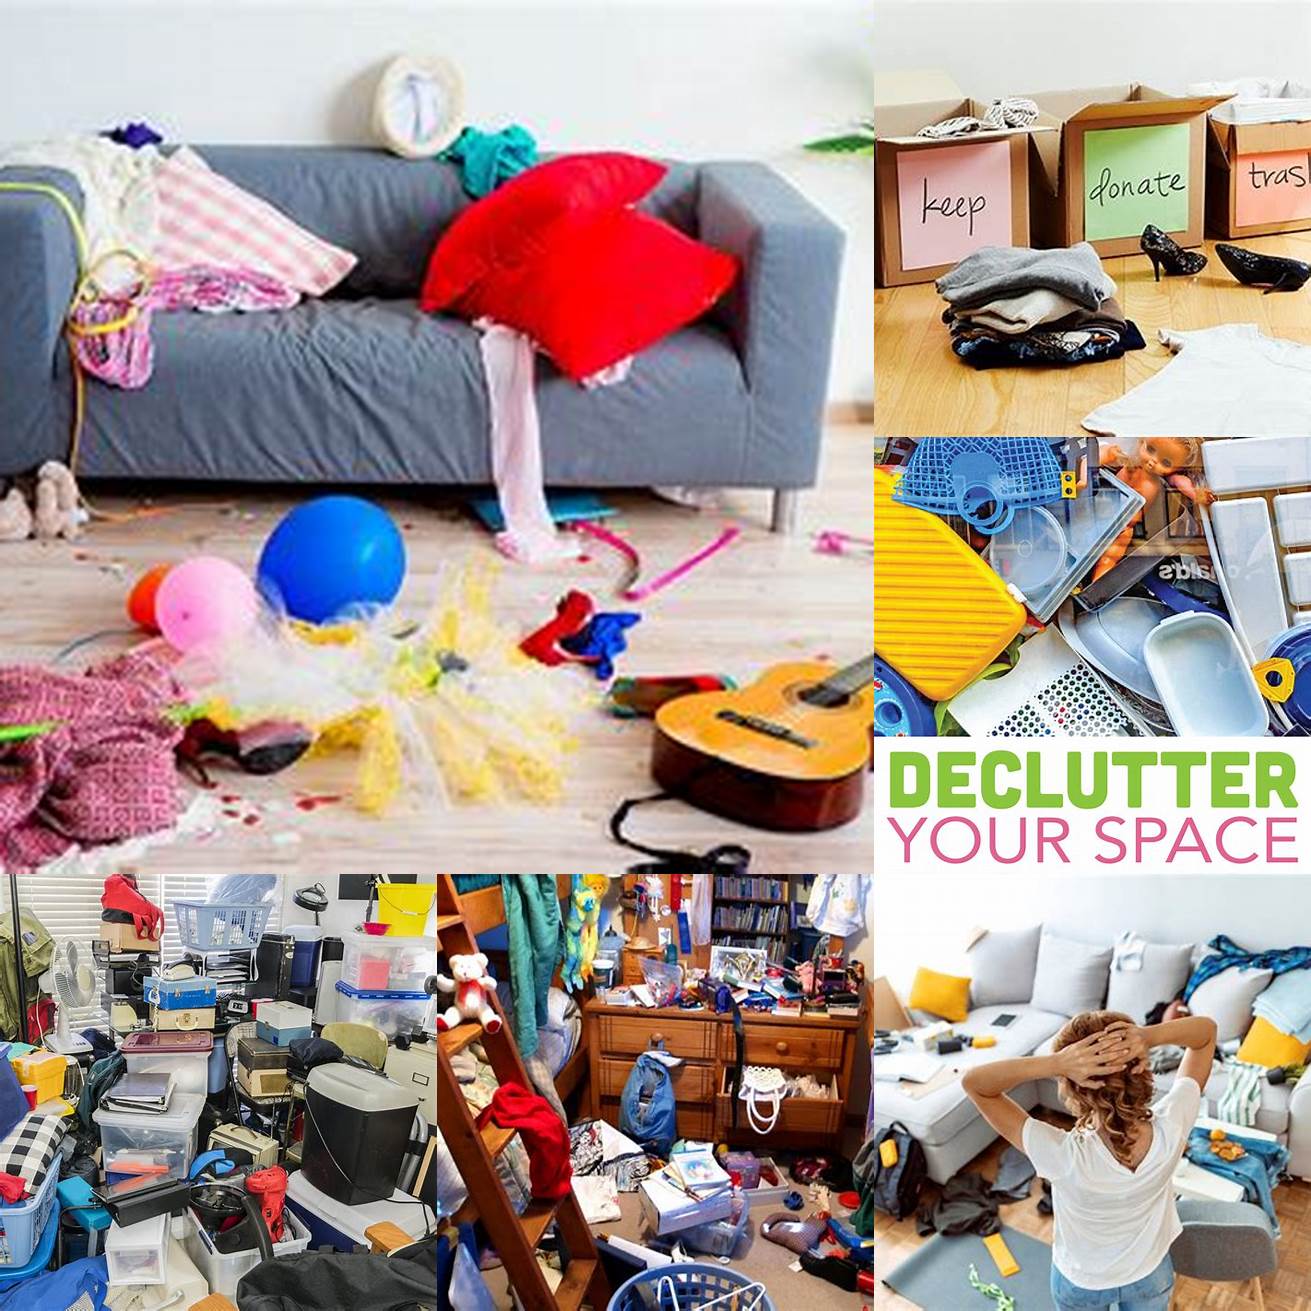 Eliminate clutter and unnecessary items